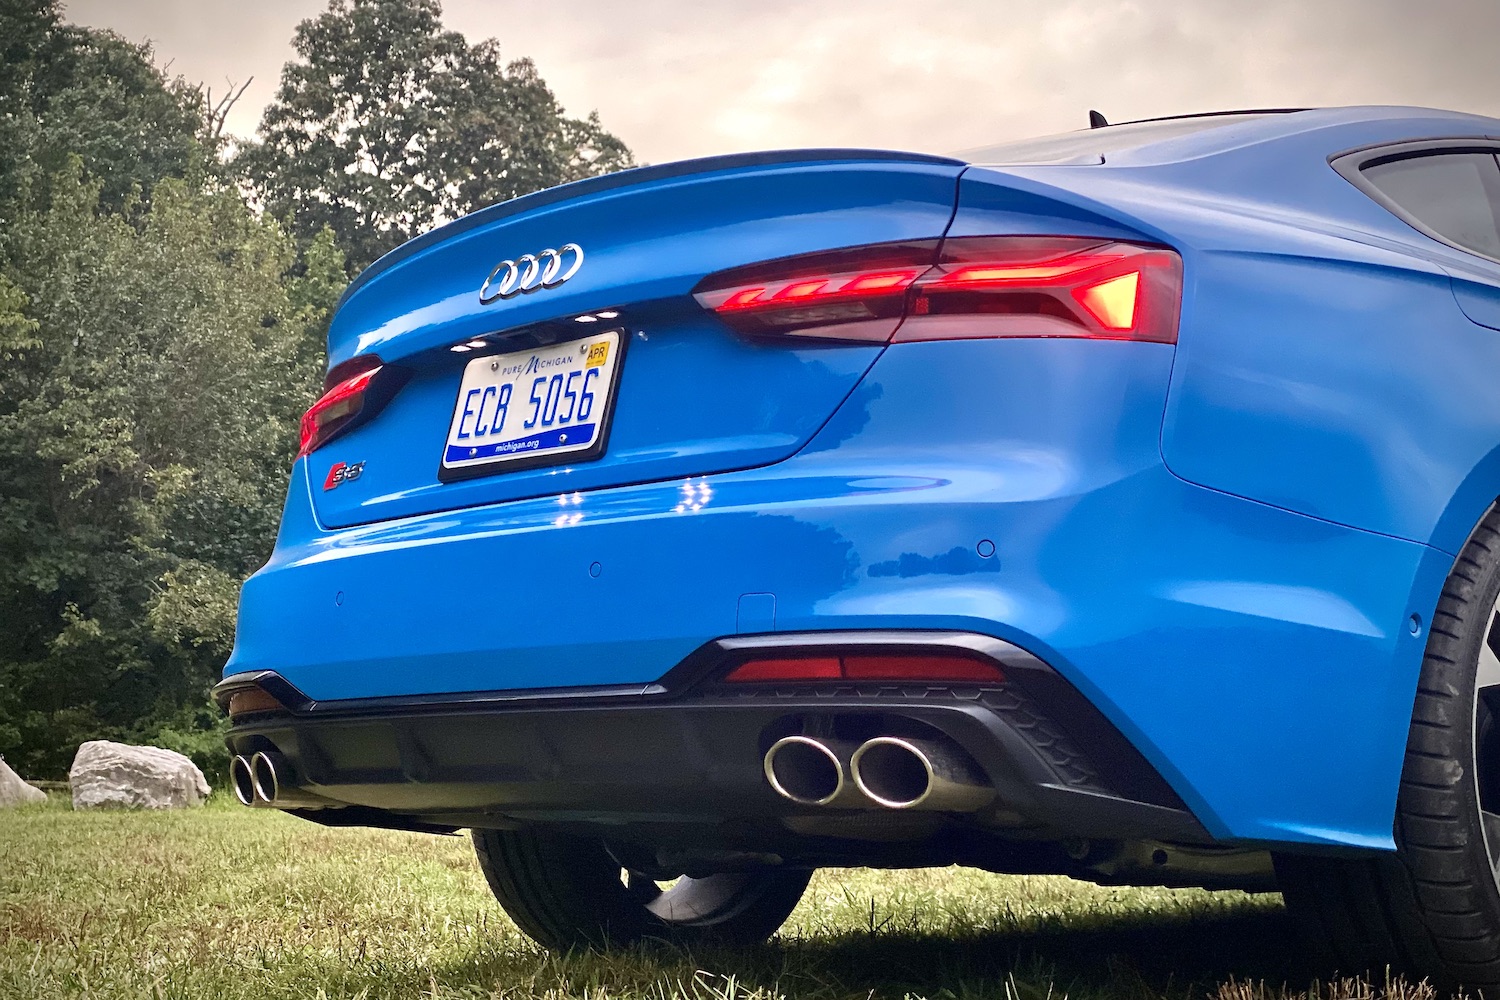 Close up of rear end of 2023 Audi S5 Sportback from below with trees in the back.